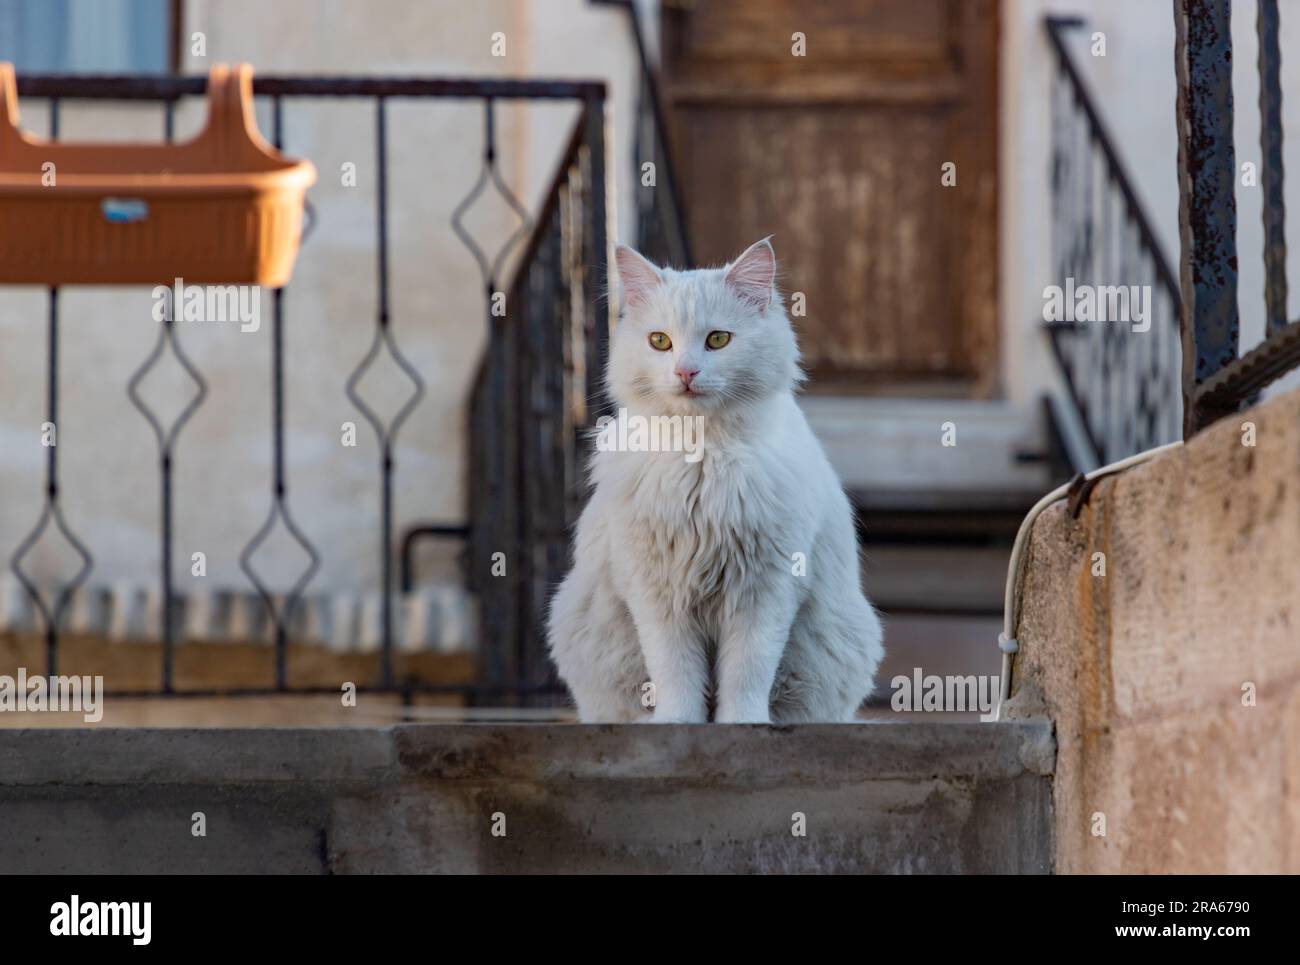 A picture of a white Turkish Angora cat sitting atop some stairs. Stock Photo